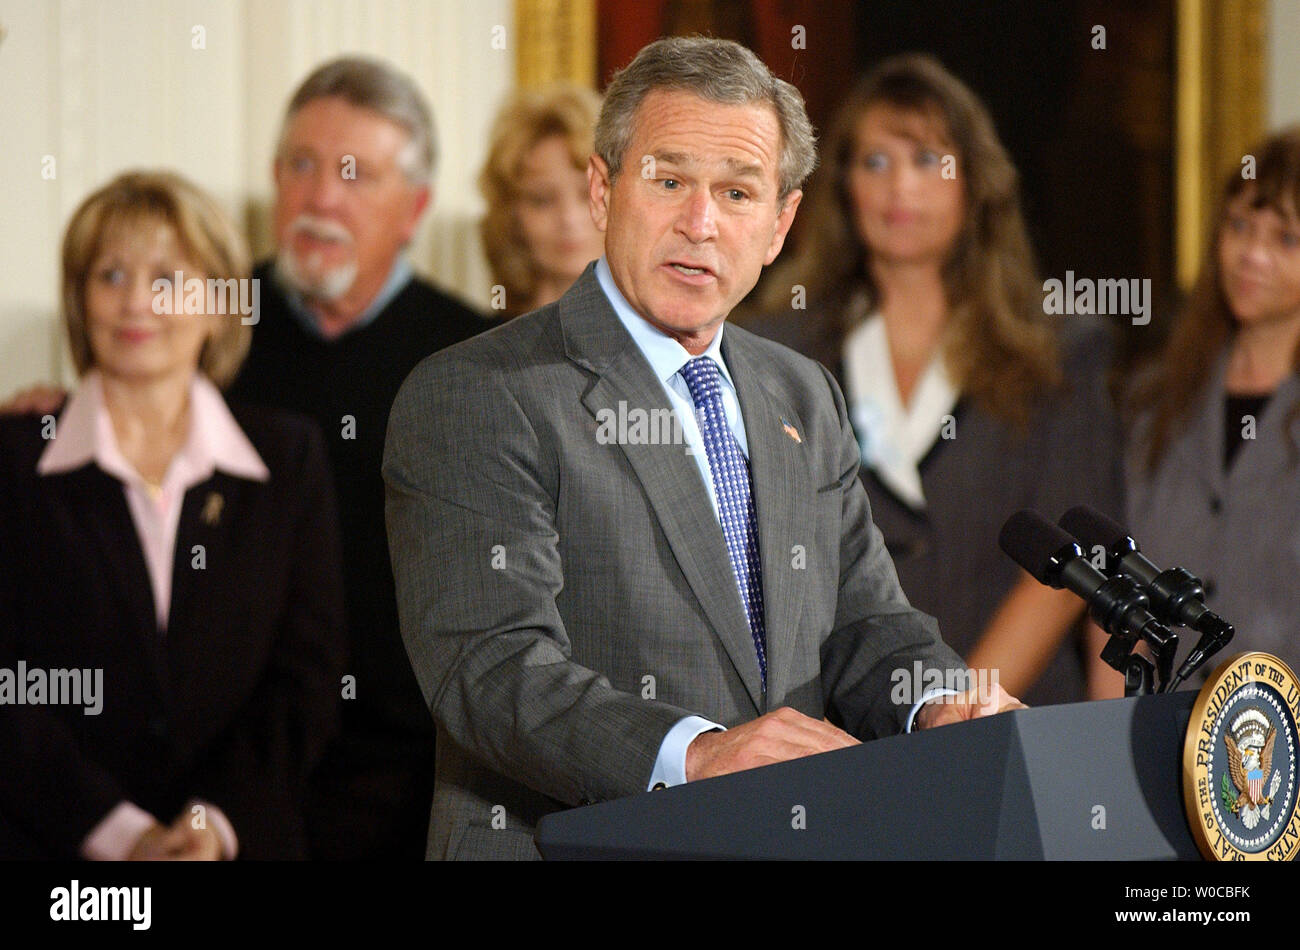 President George W. Bush speaks before signing the Unborn Victims of Violence Act of 2004 during a ceremony in the East Room of the White House on April 1, 2004. Behind Bush are, left to right, Laci Peterson's parents Sharon Rocha and Ron Grantski, Cynthia Warner Tracy Marciniak-Seavers, and Stephanie Alberts.    (UPI Photo/Roger L. Wollenberg) Stock Photo